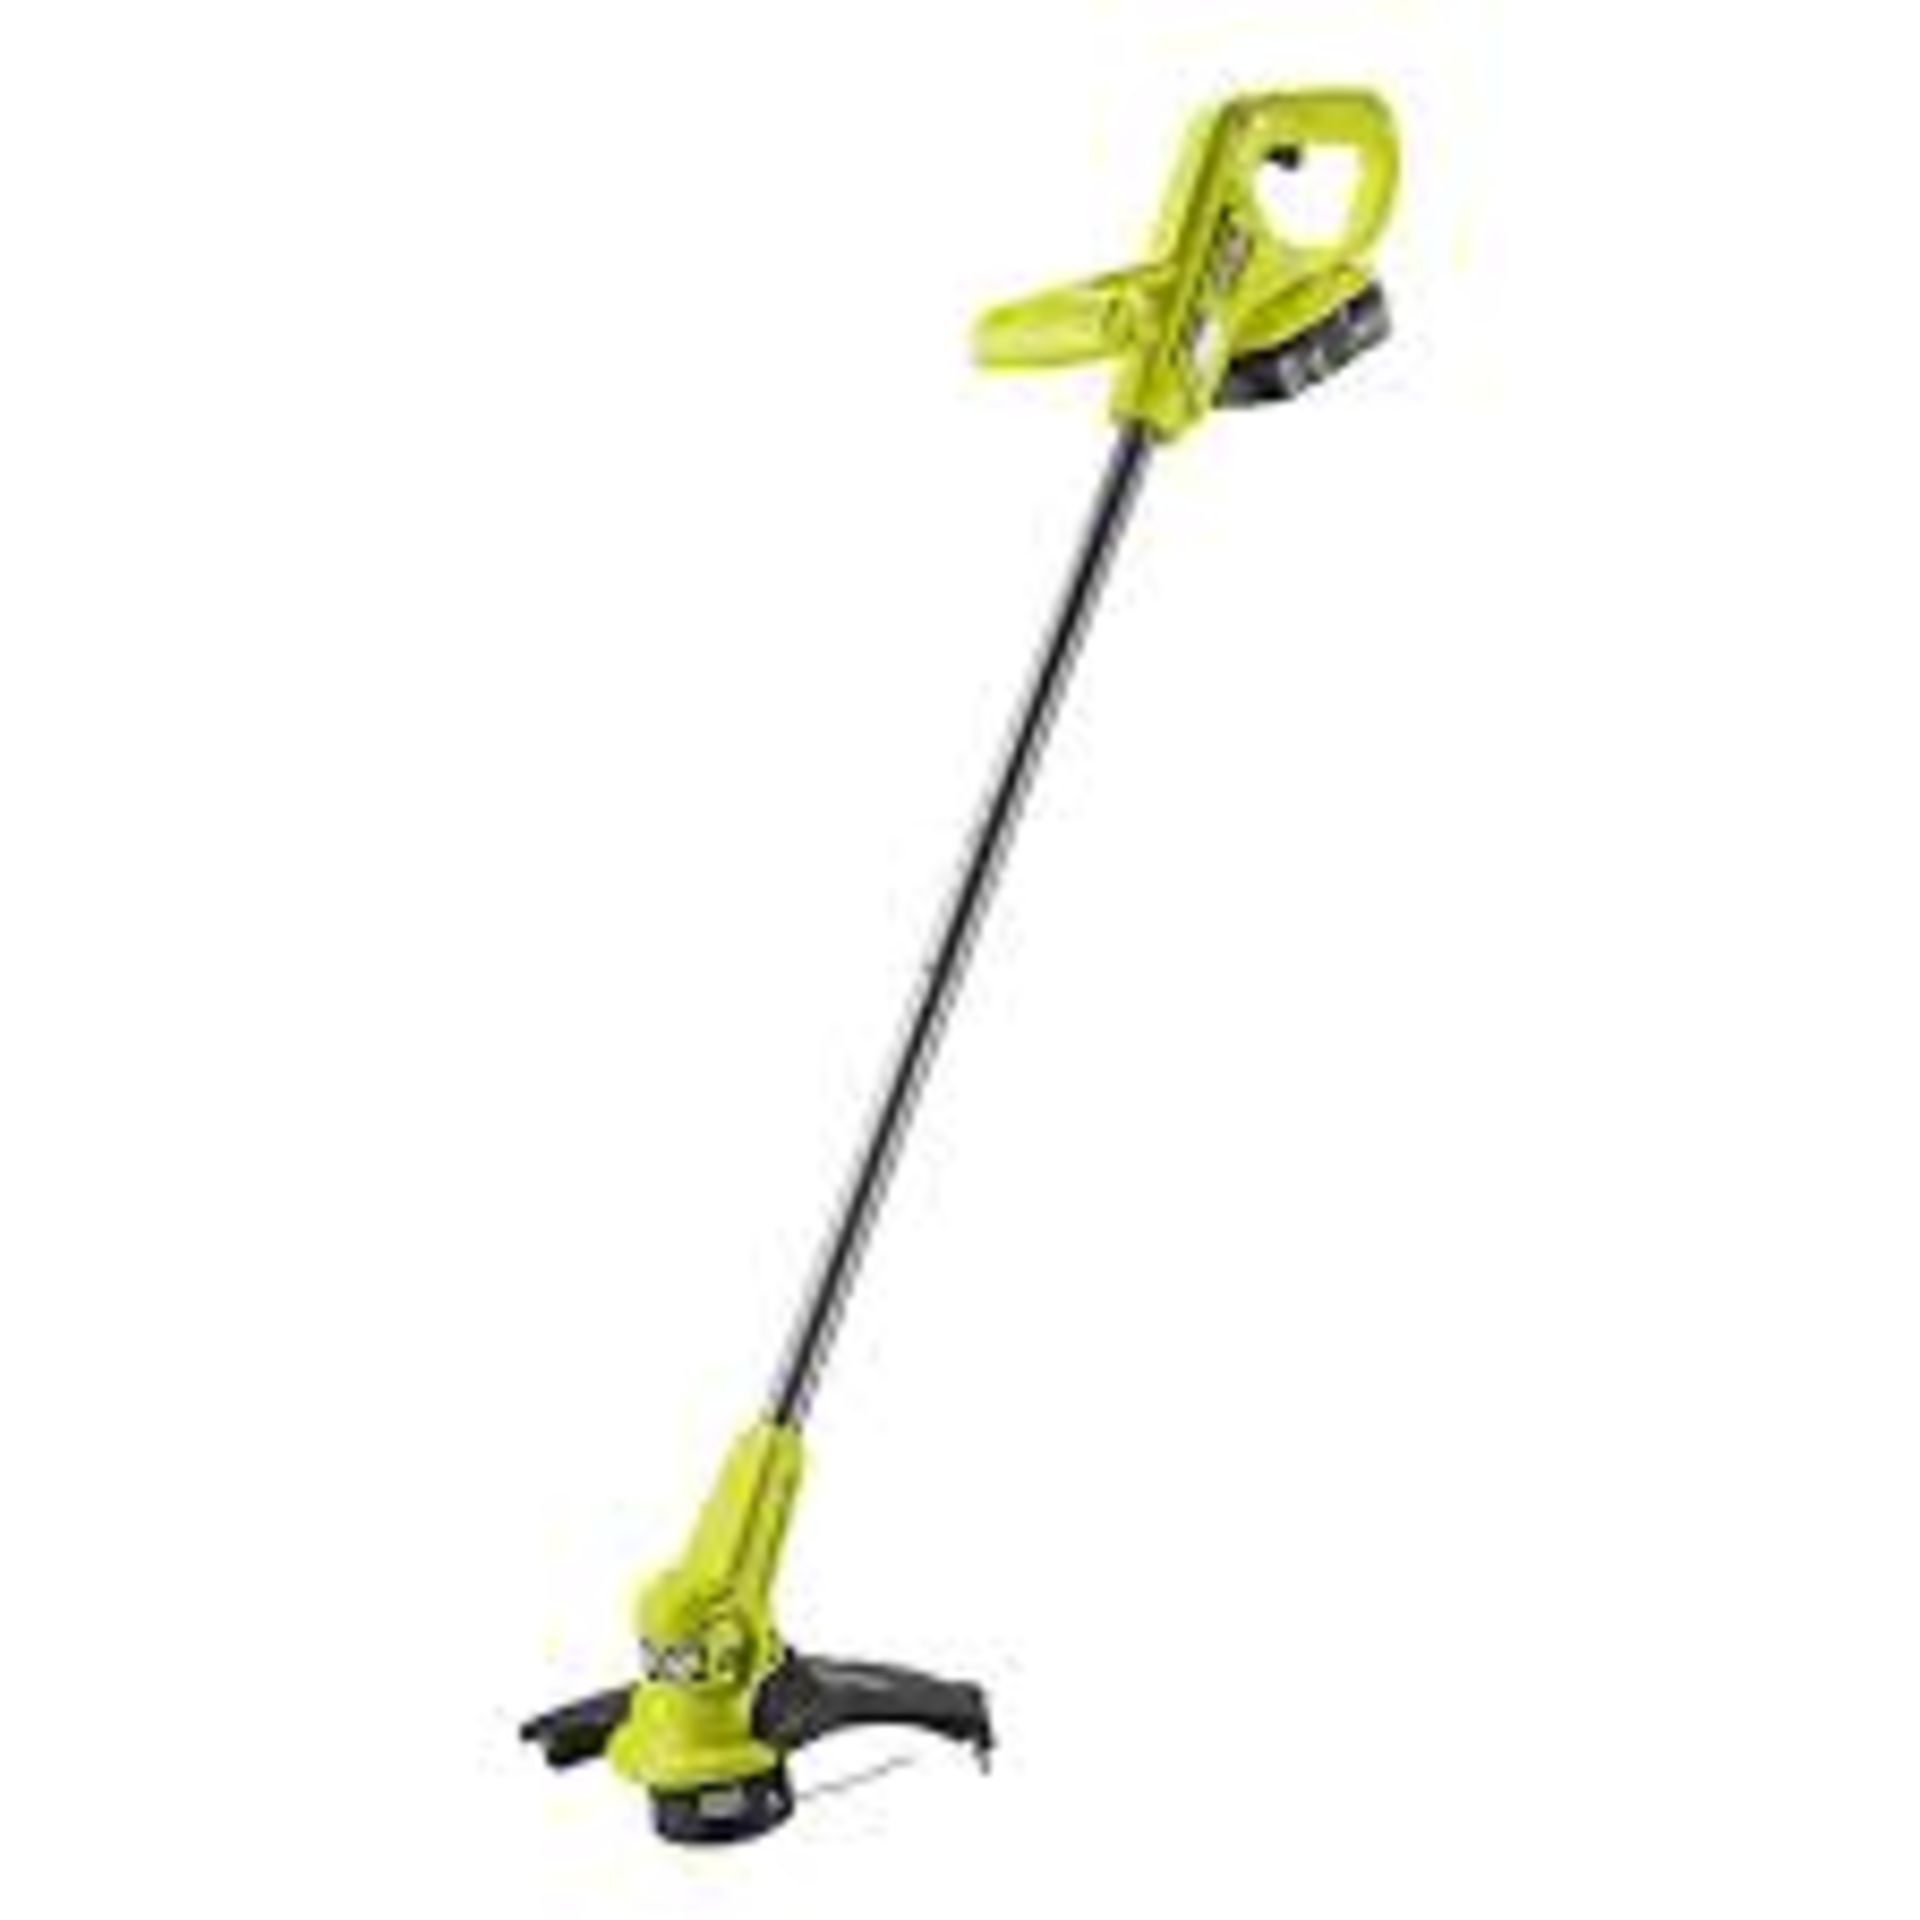 Ryobi ONE+ 18V 230mm Cordless Grass trimmer RY18LT23A-120. - PW. As part of the Ryobi ONE+™ system